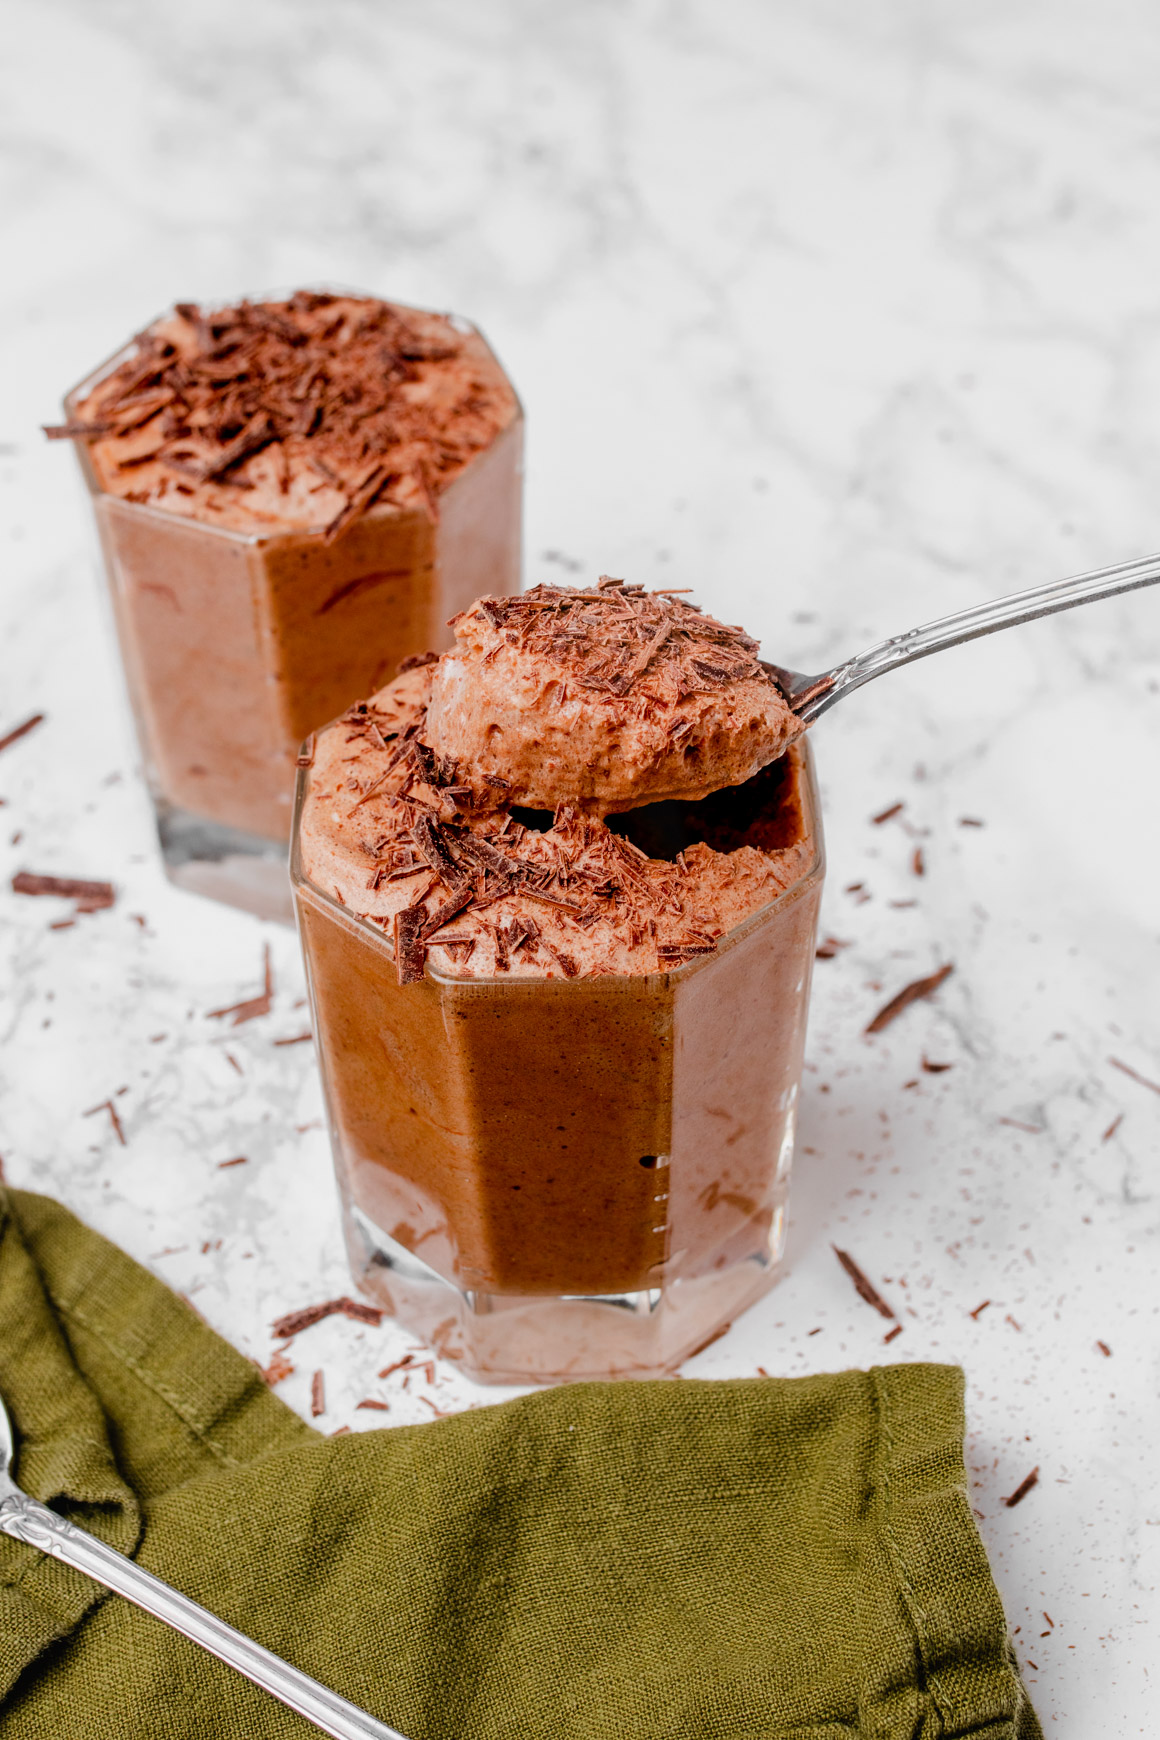 3-Ingredient Chocolate Mousse